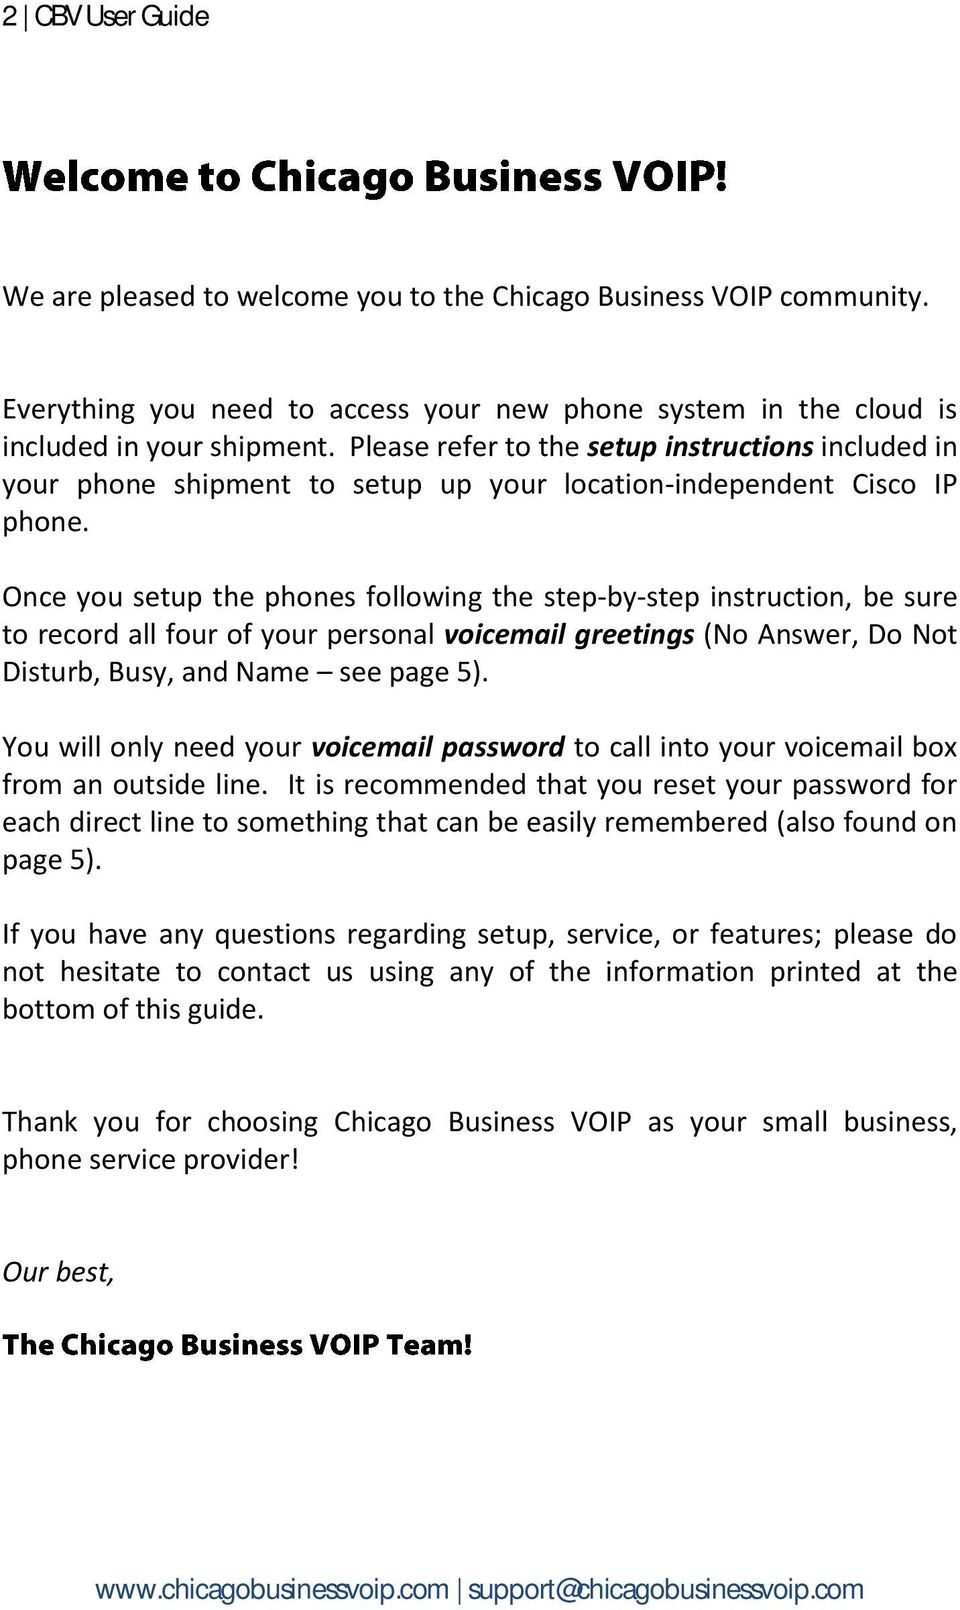 Once you setup the phones following the step-by-step instruction, be sure to record all four of your personal voicemail greetings (No Answer, Do Not Disturb, Busy, and Name see page 5).